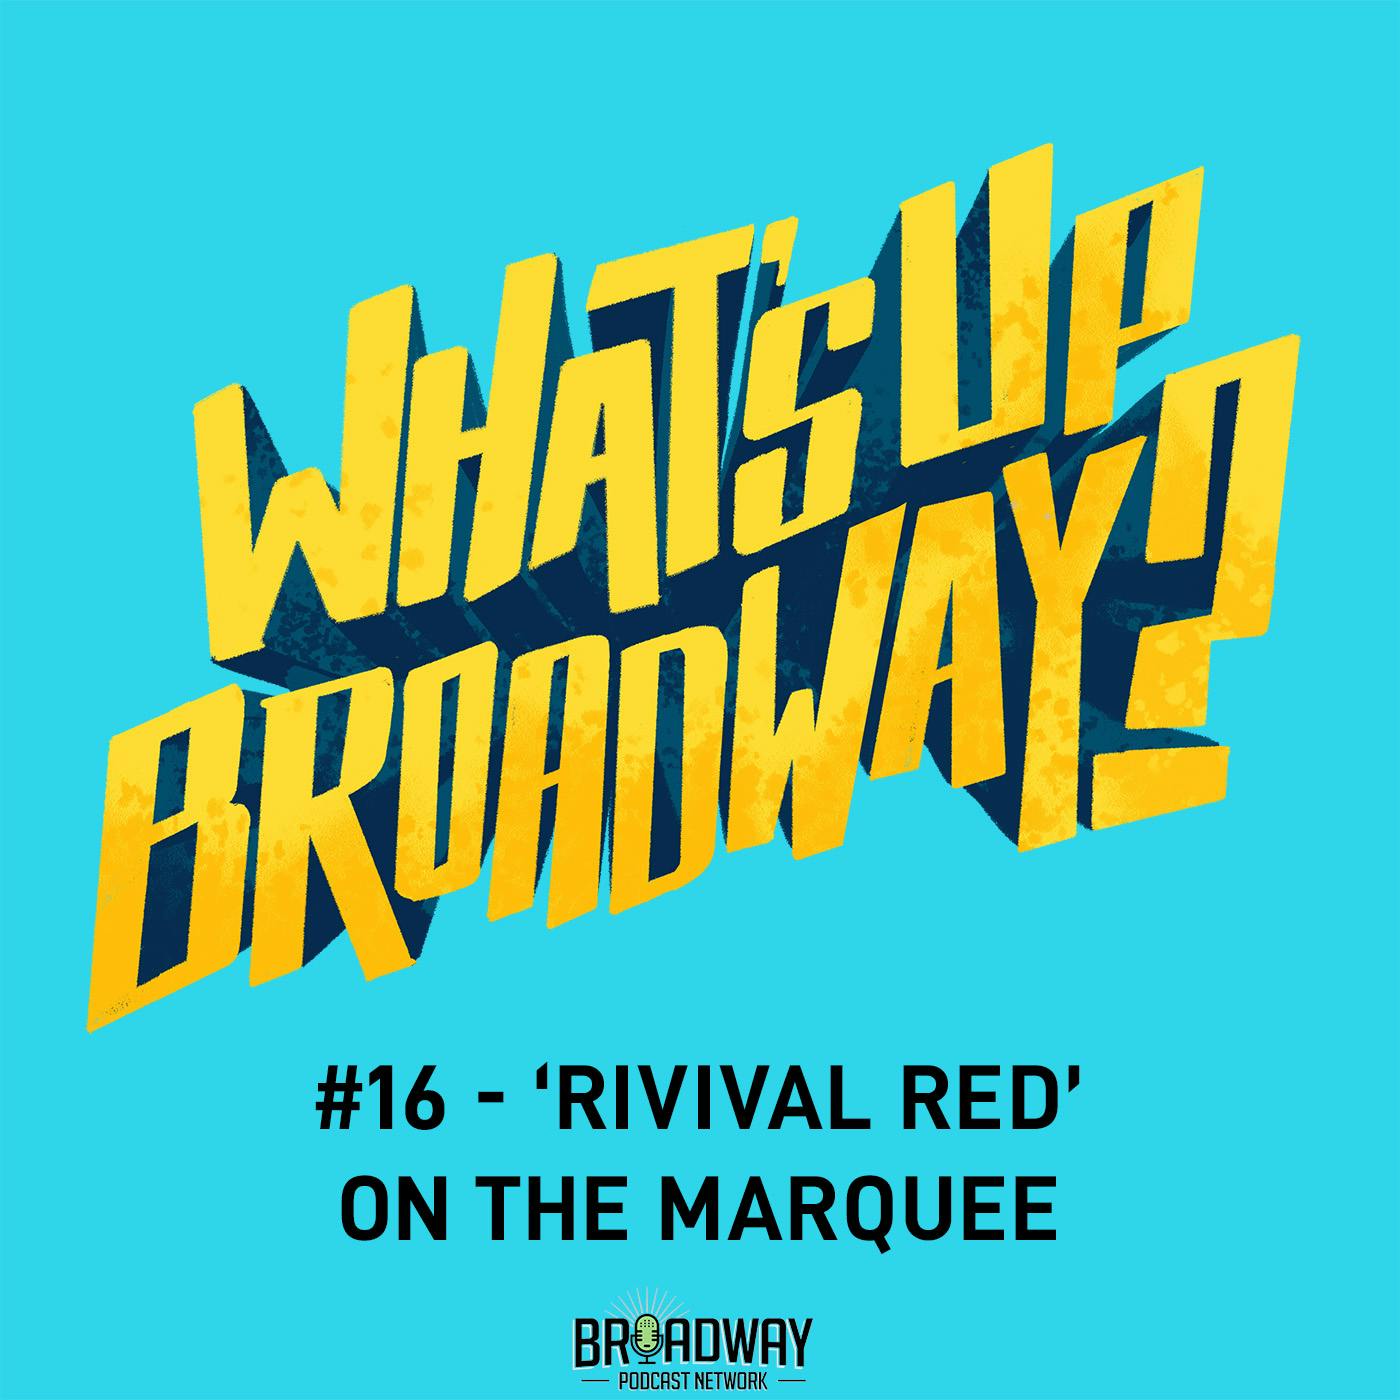 #16 - 'Revival Red' is on The Music Man Marquee